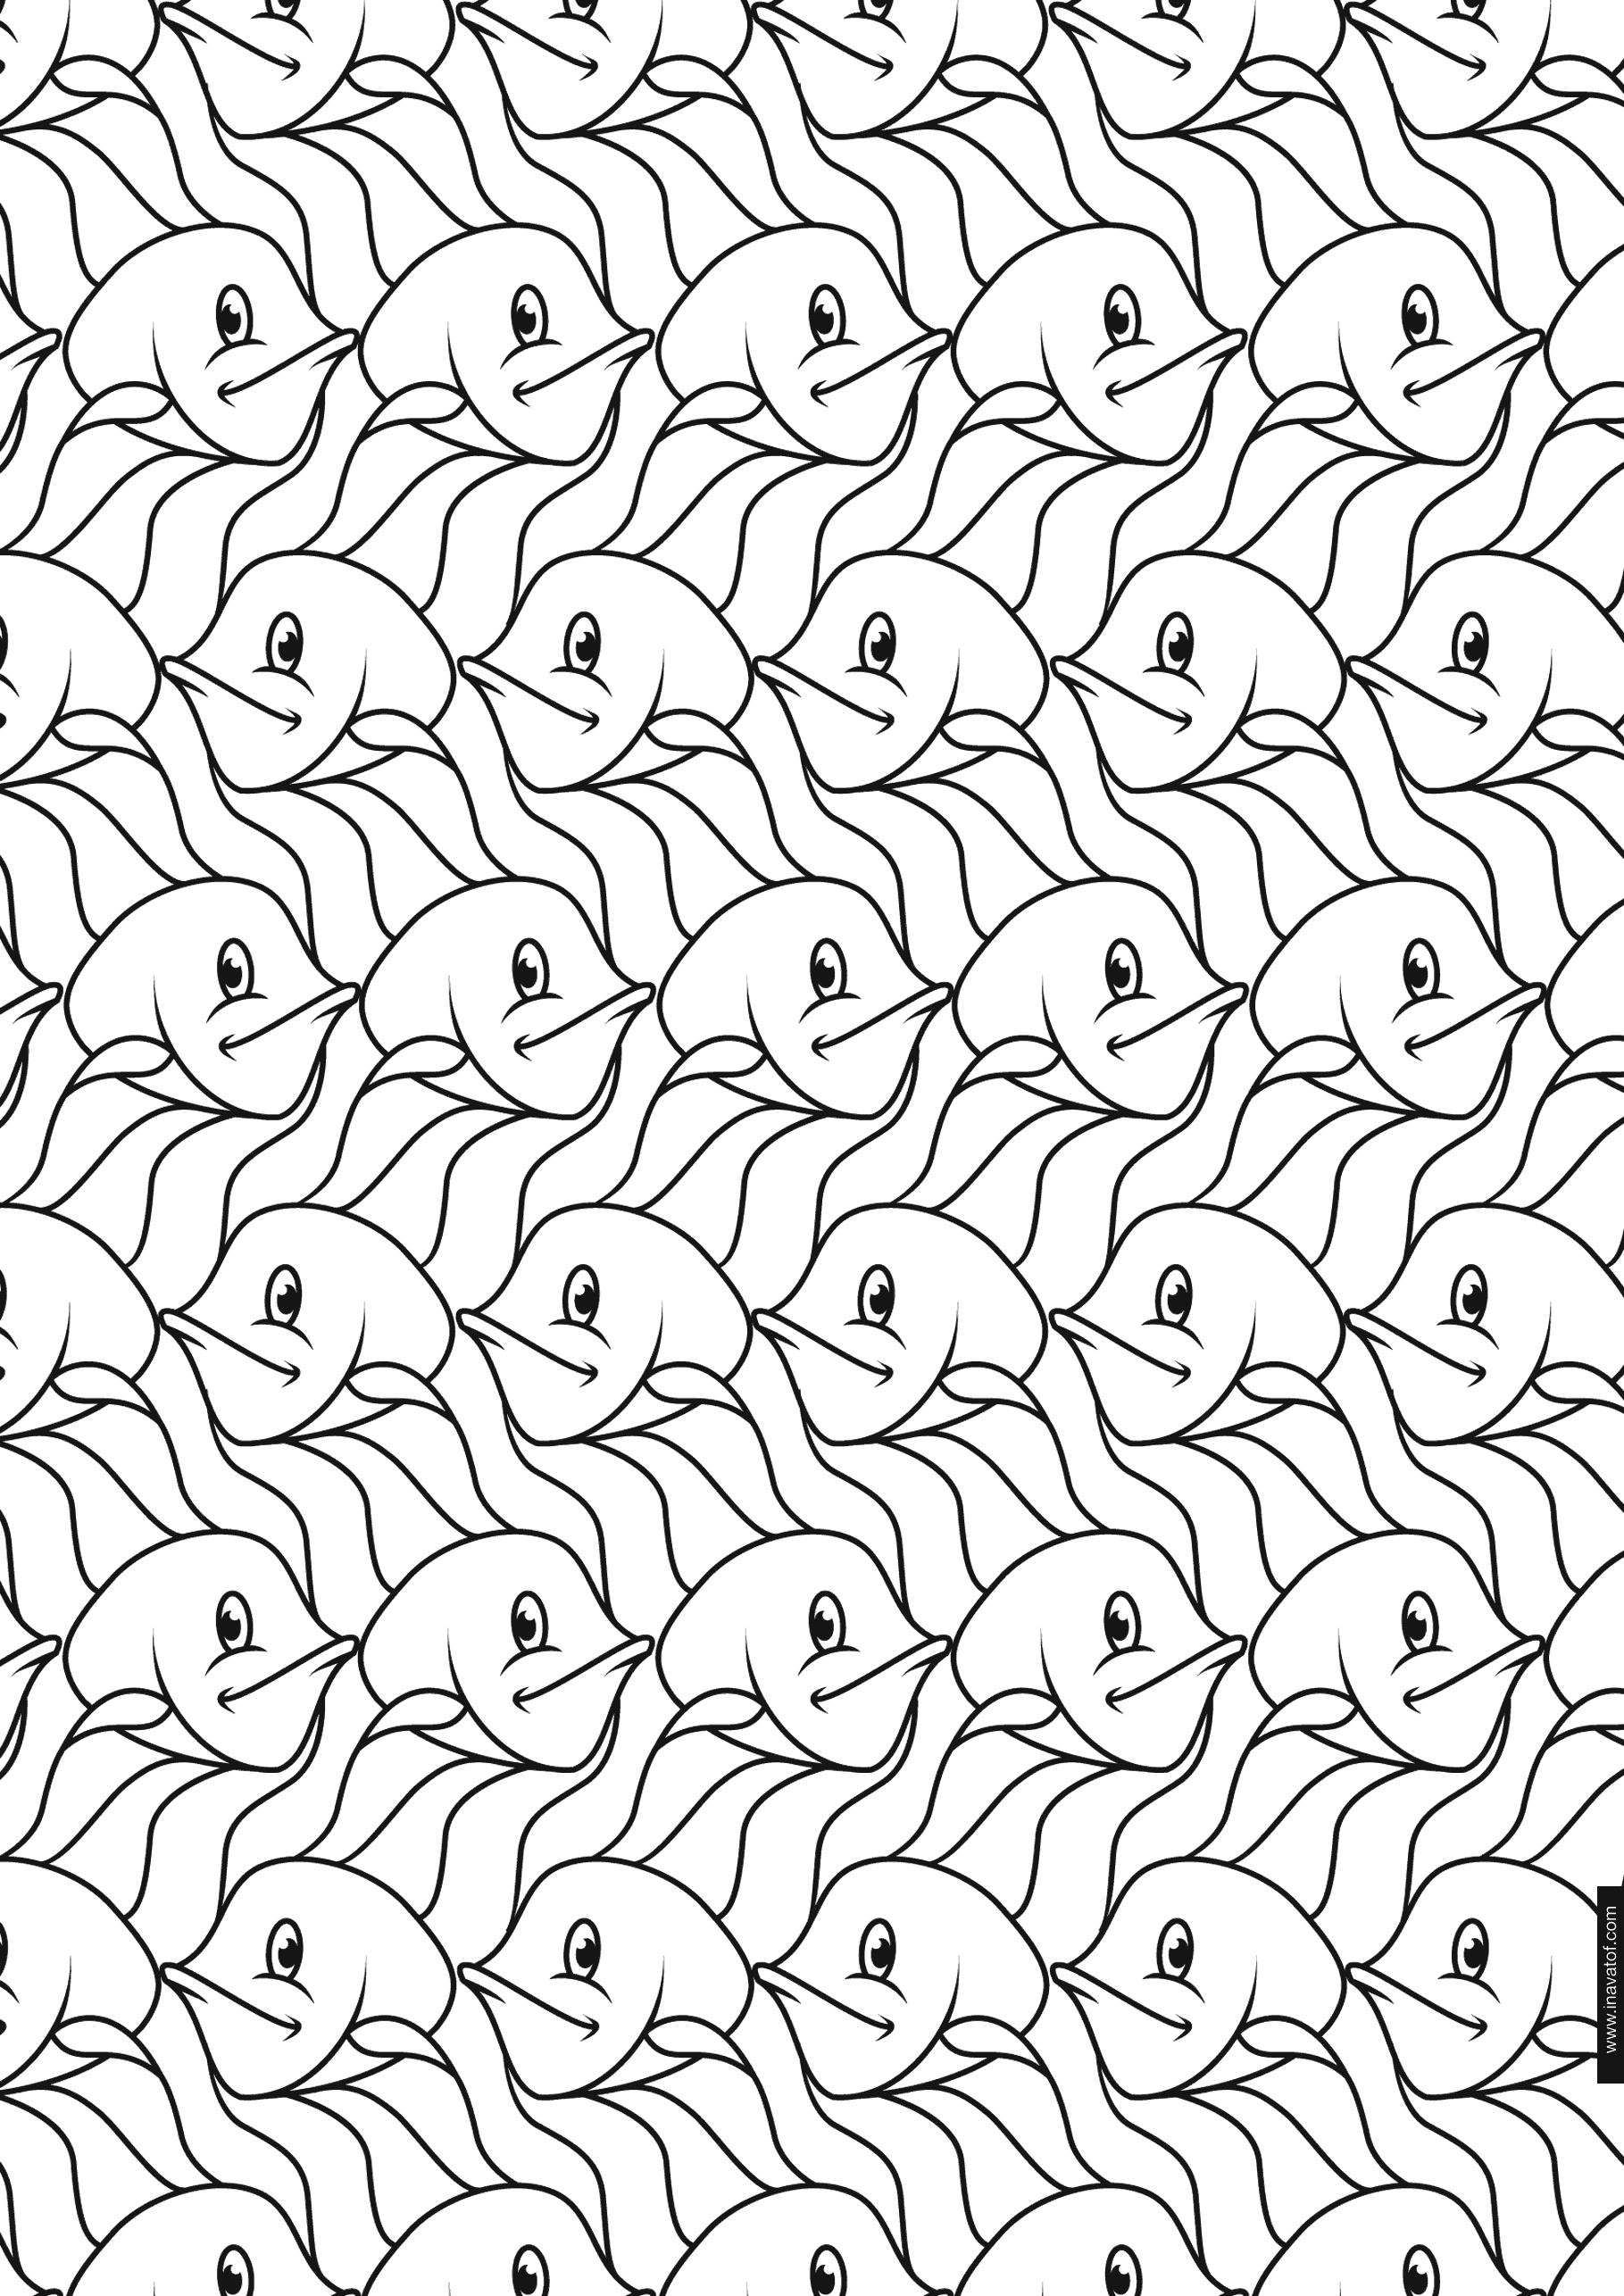 17 Free Pictures for: Tessellation Coloring Pages. Temoon.us